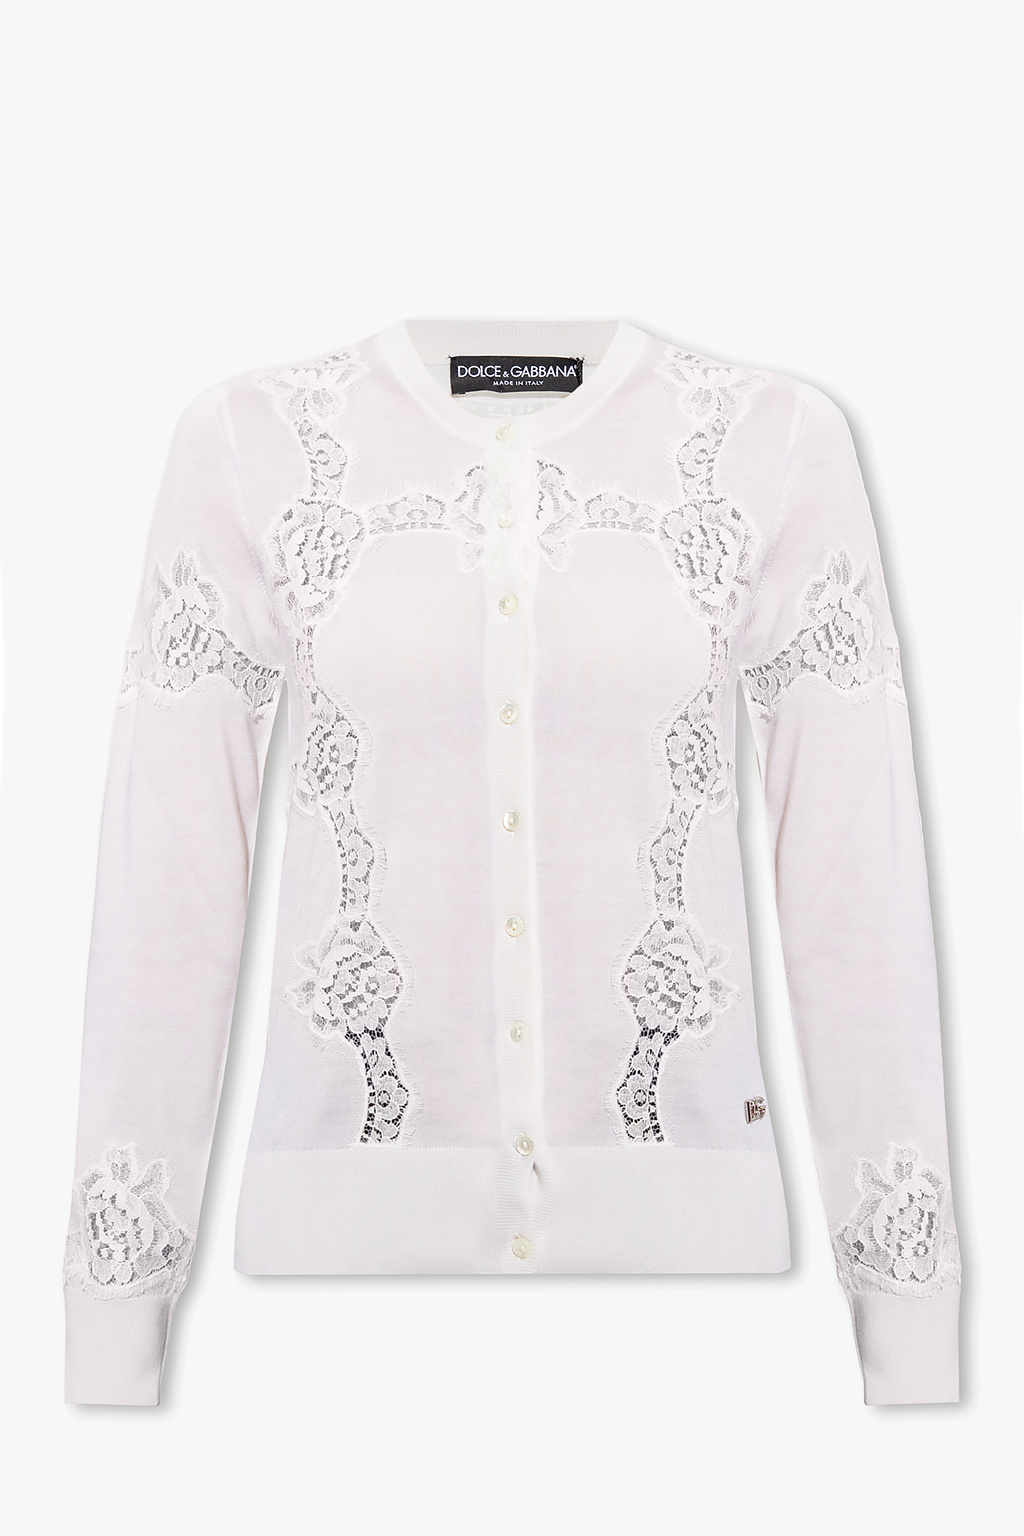 Dolce & Gabbana Cardigan with lace inserts